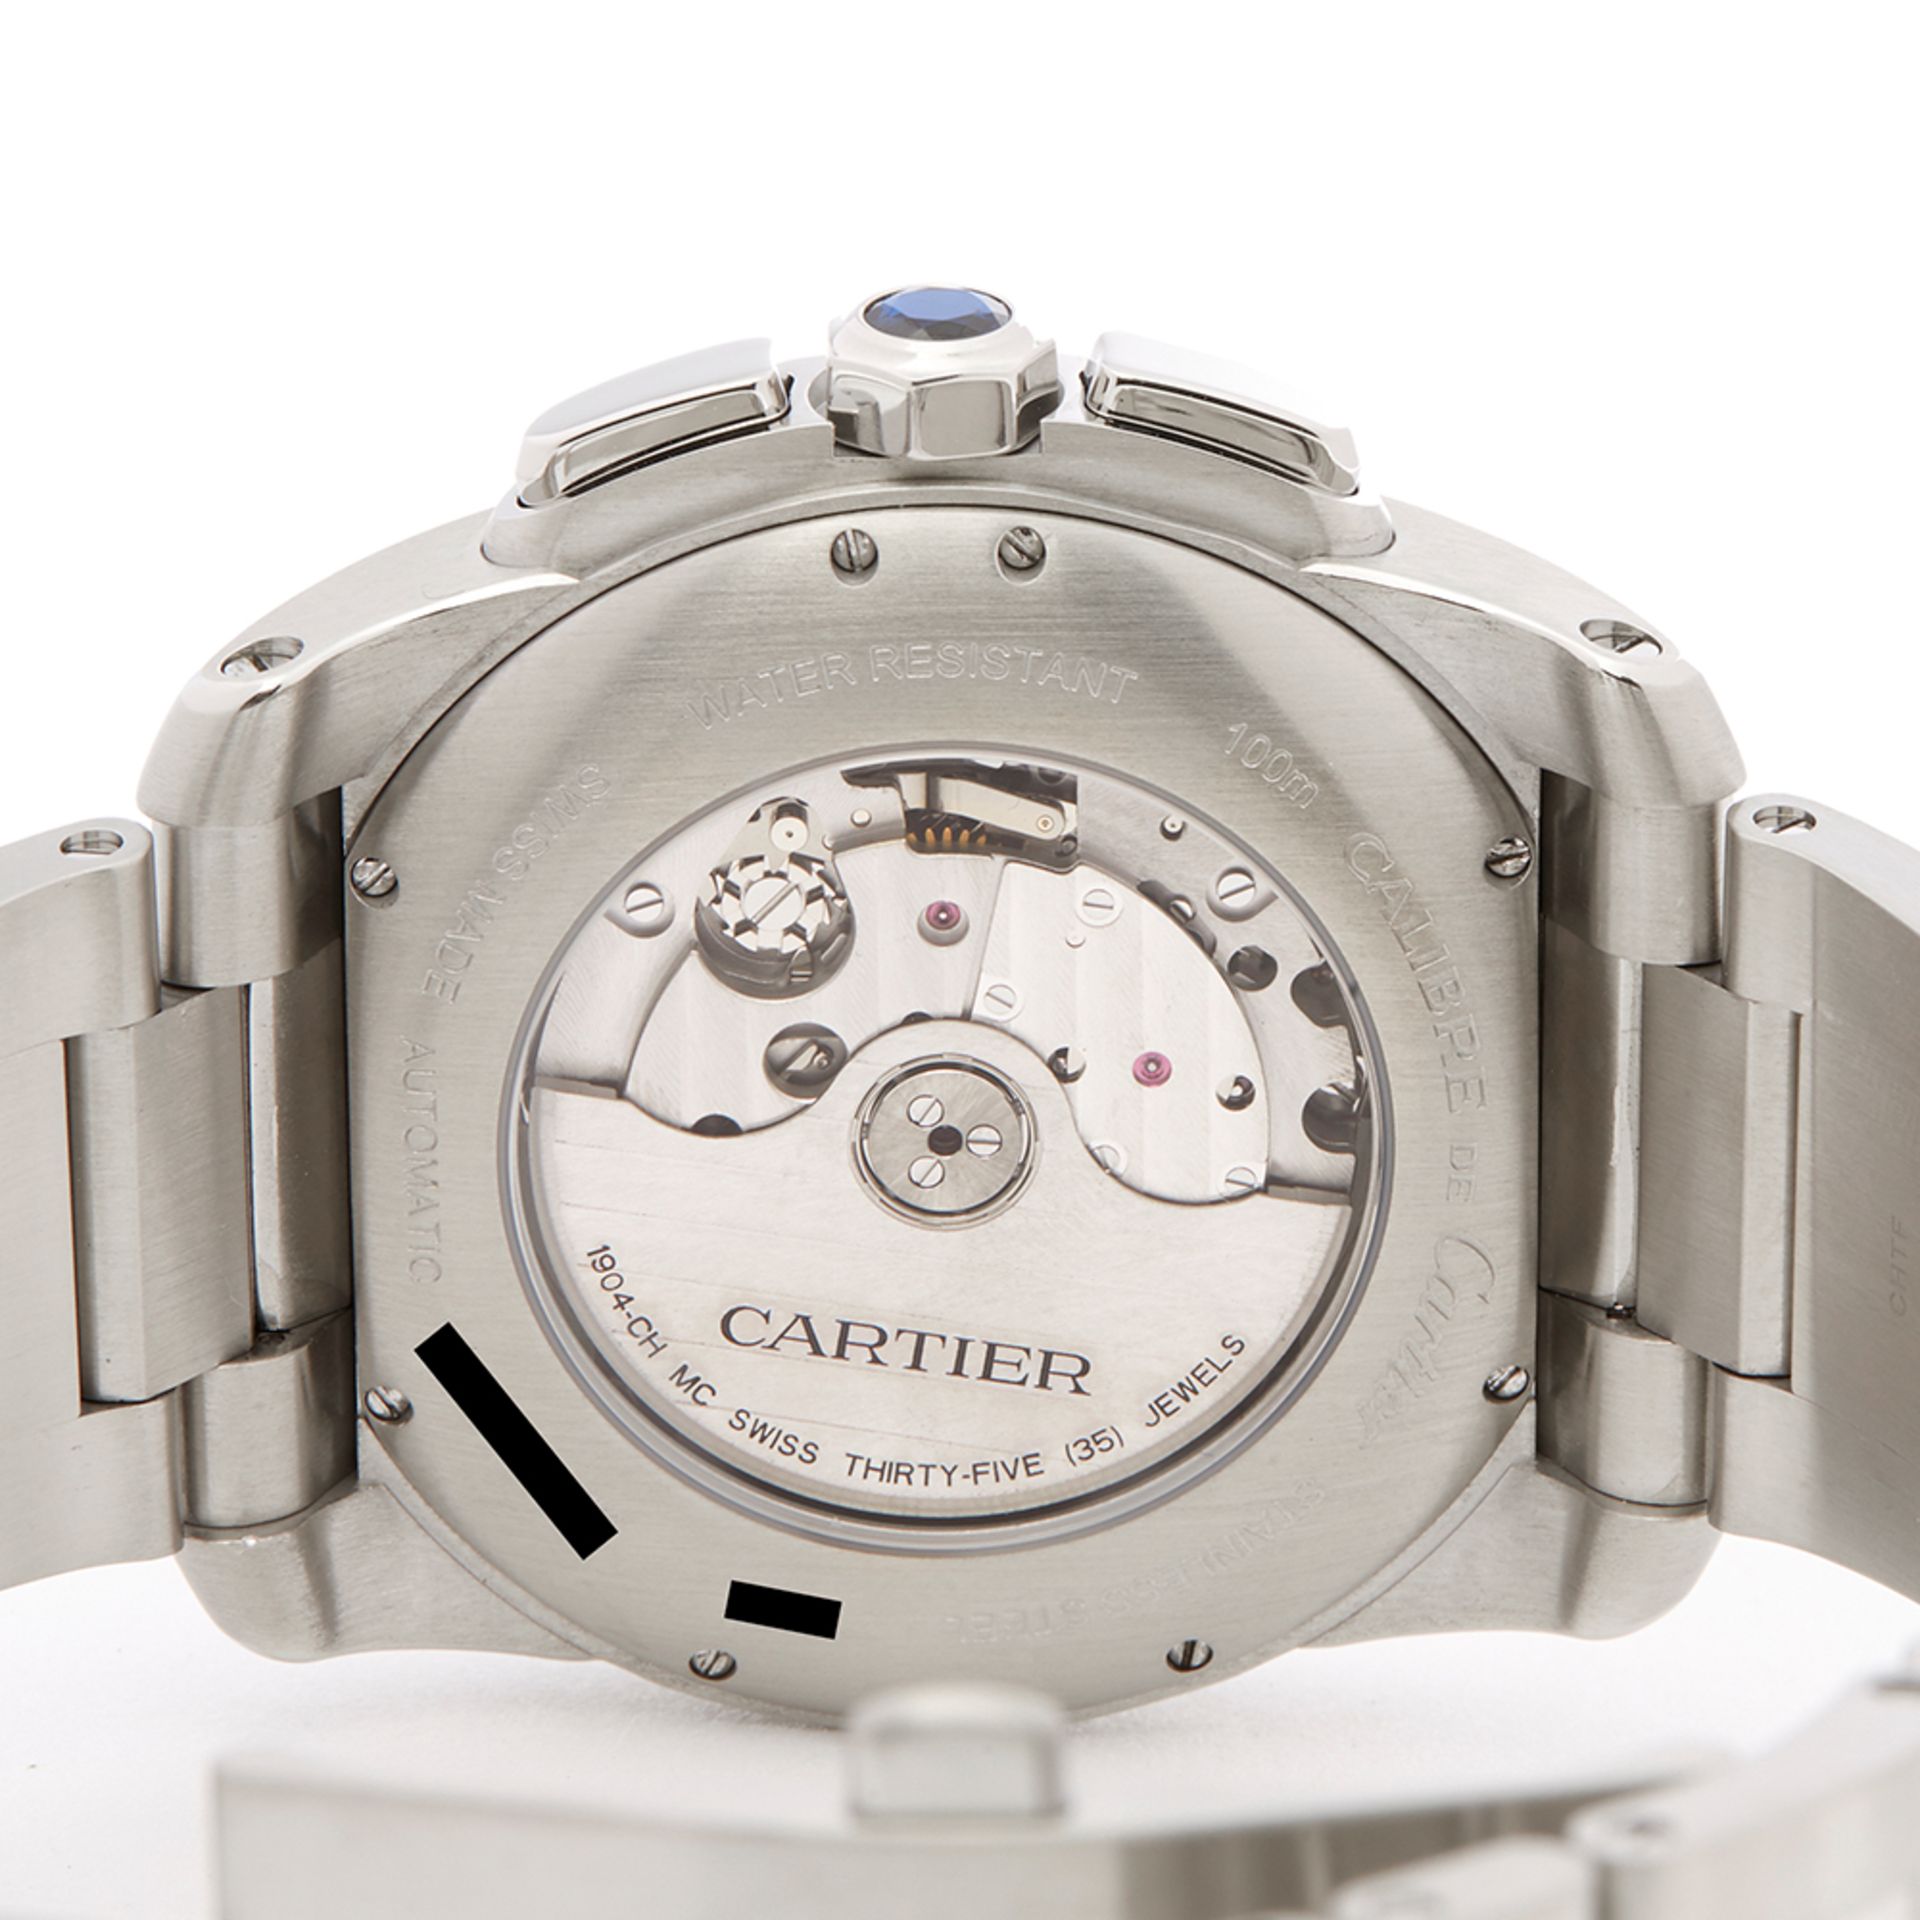 Cartier Calibre Stainless Steel - W7100061 - Image 5 of 6